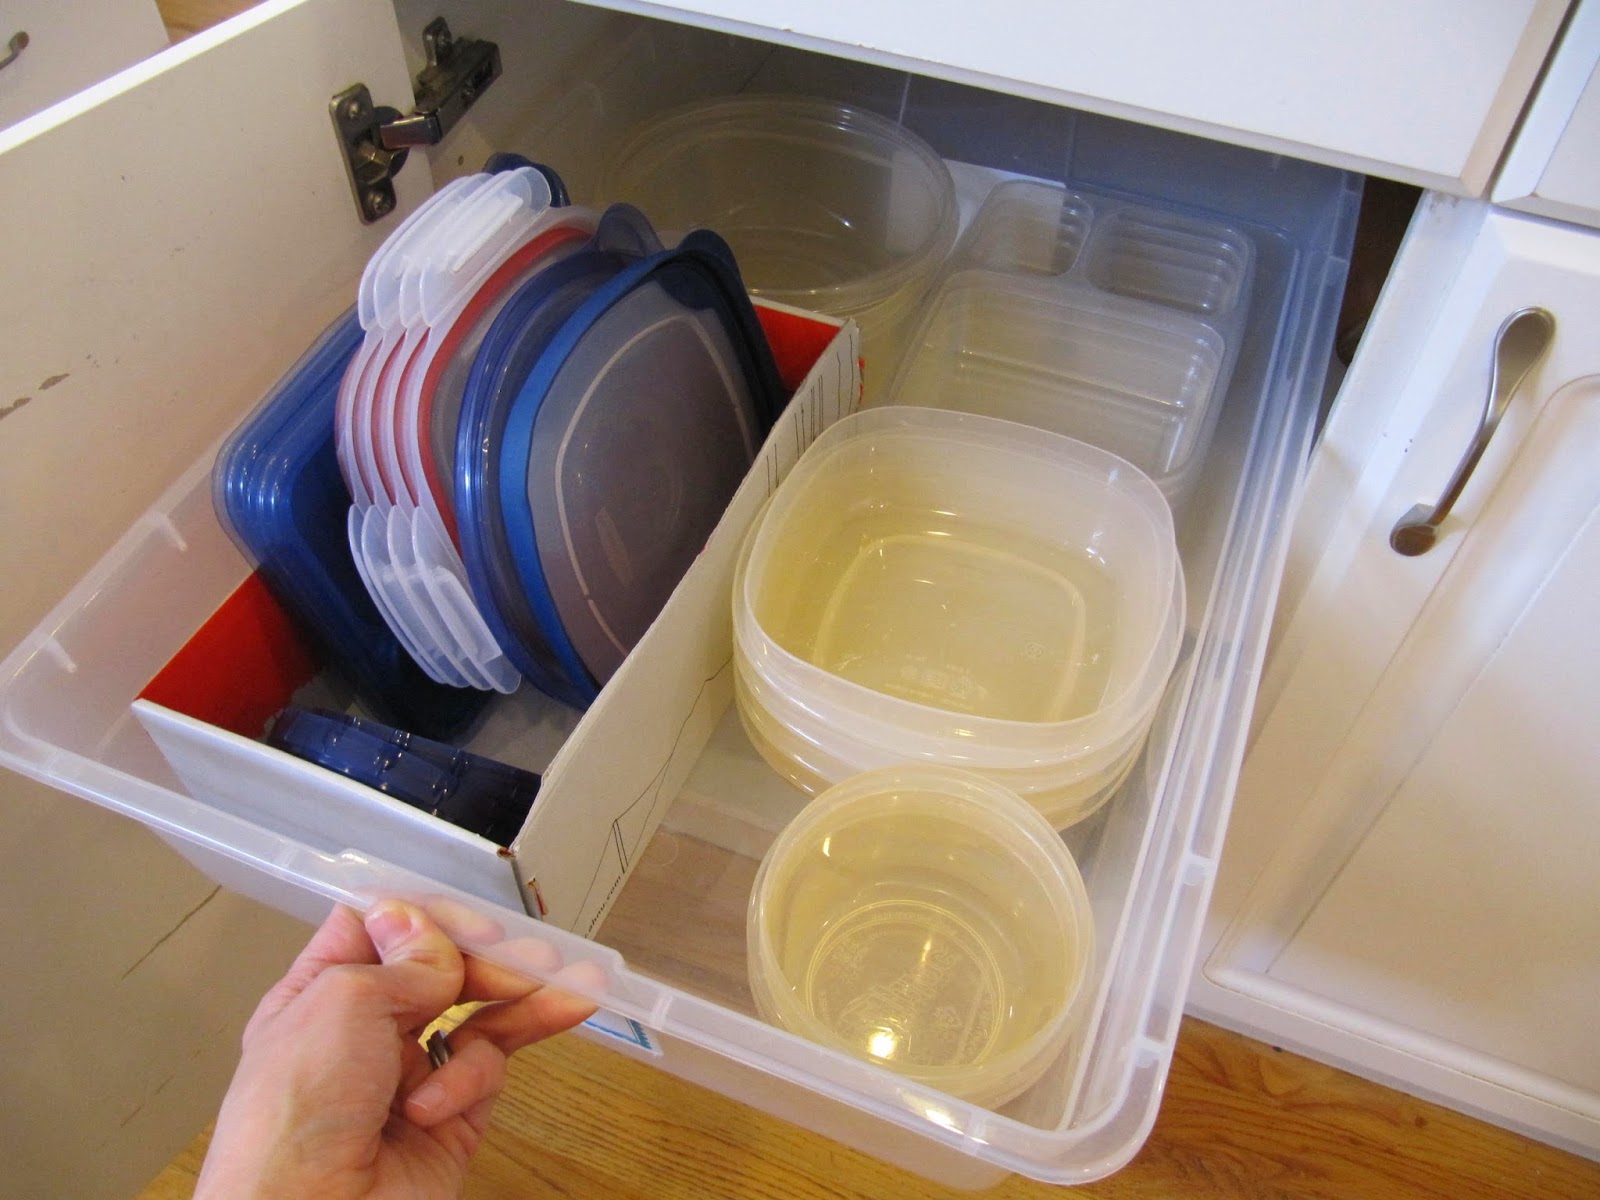 The Easiest Way to Organize Food Storage Containers ~ Organize